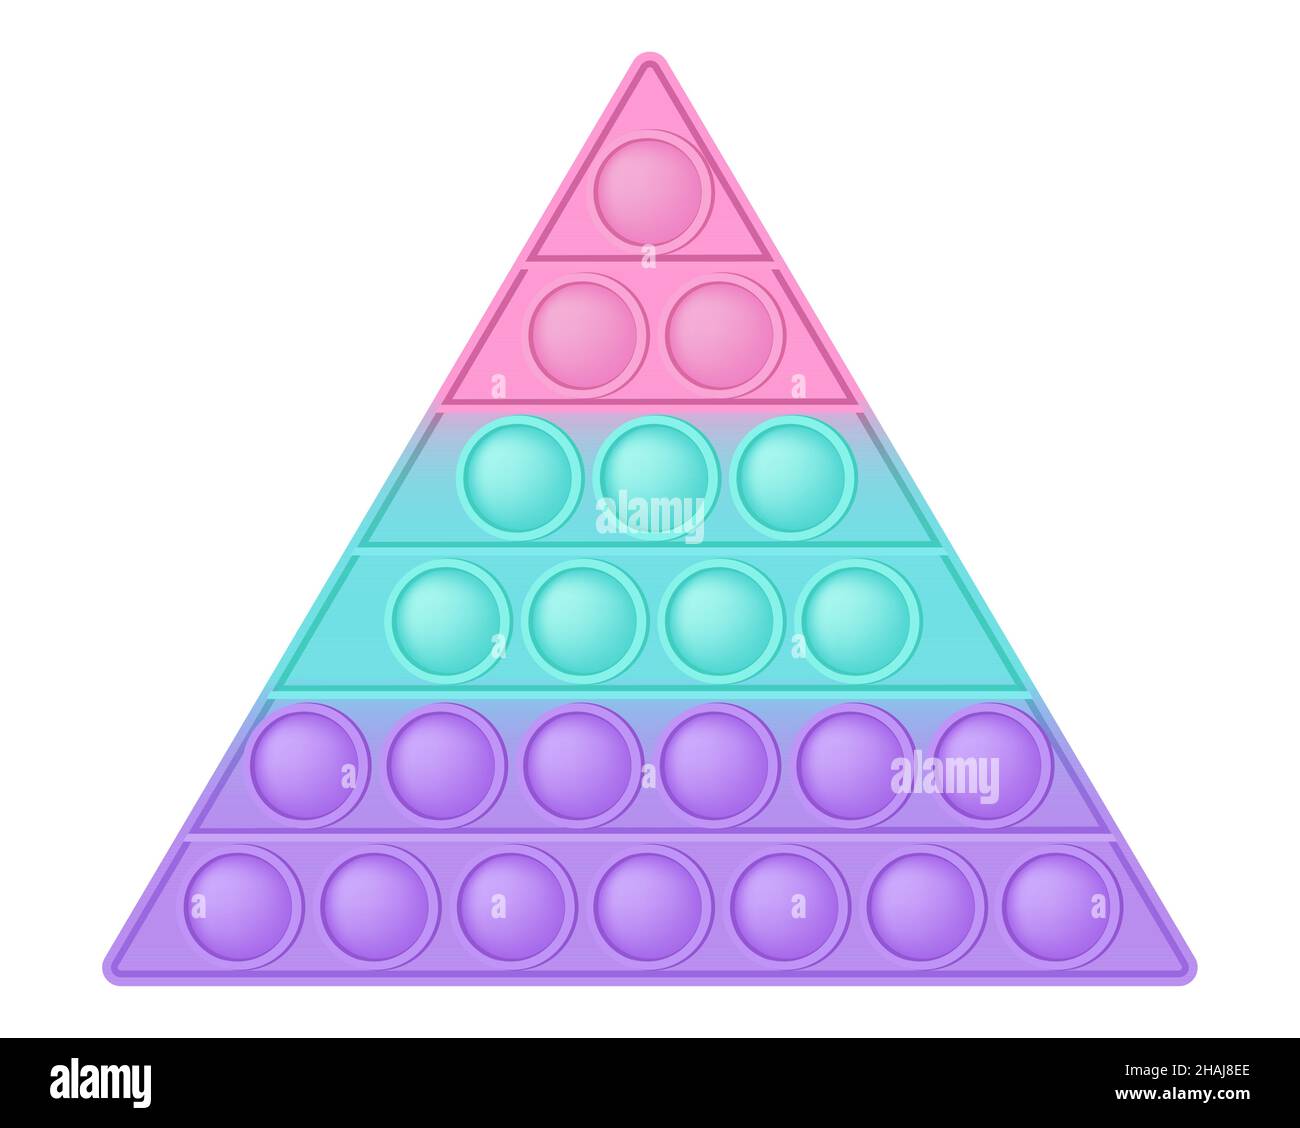 Popit figure triangle as a fashionable silicon toy for fidgets. Addictive anti stress toy in pastel colors. Bubble anxiety developing vibrant pop it t Stock Vector